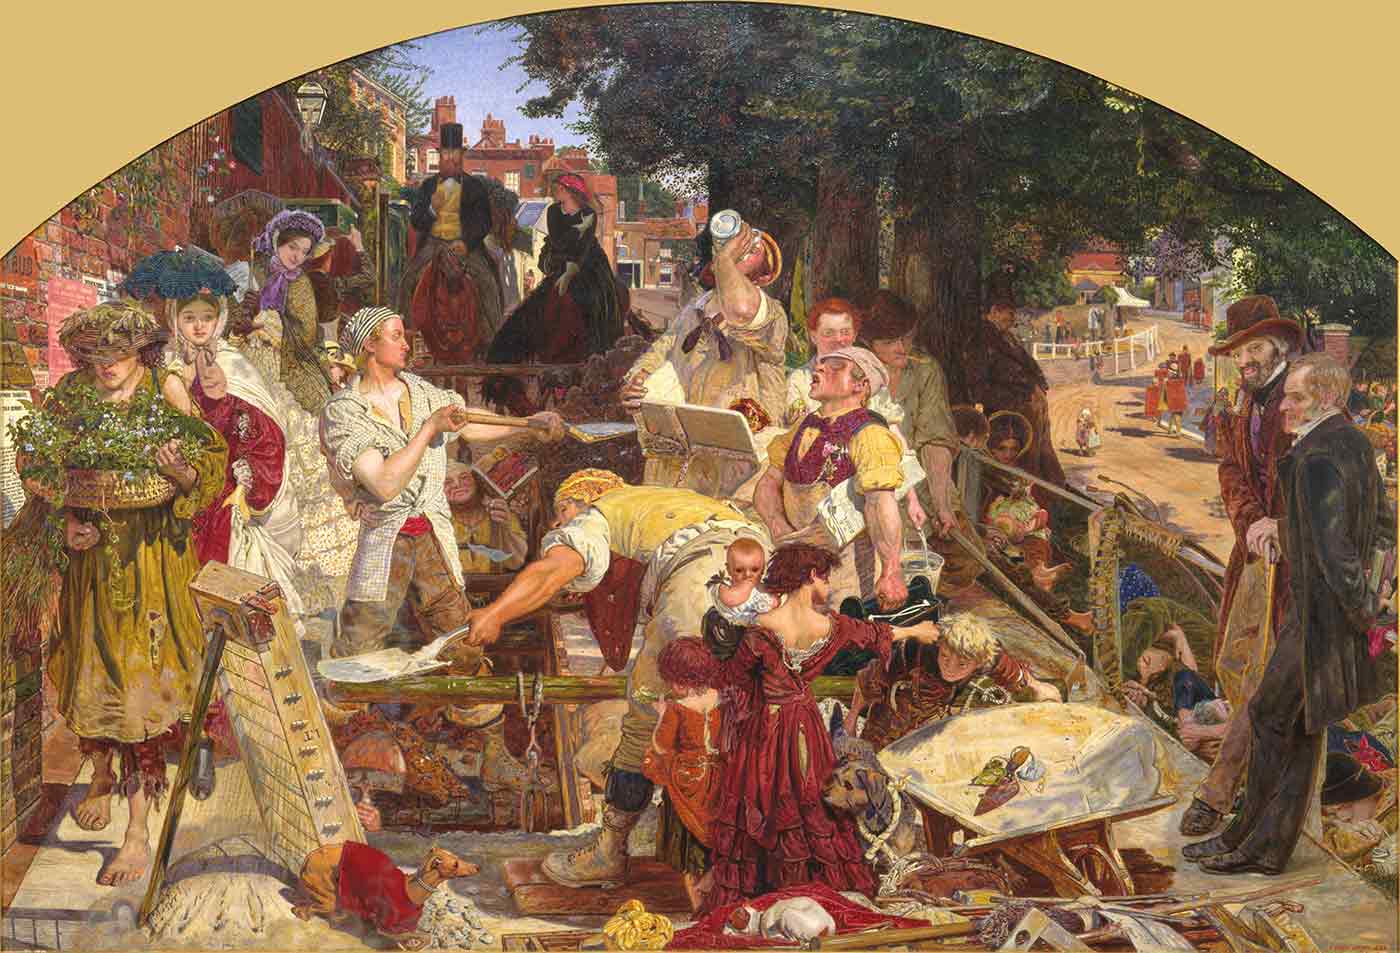 "Work," by Ford Maddox Brown, 1863